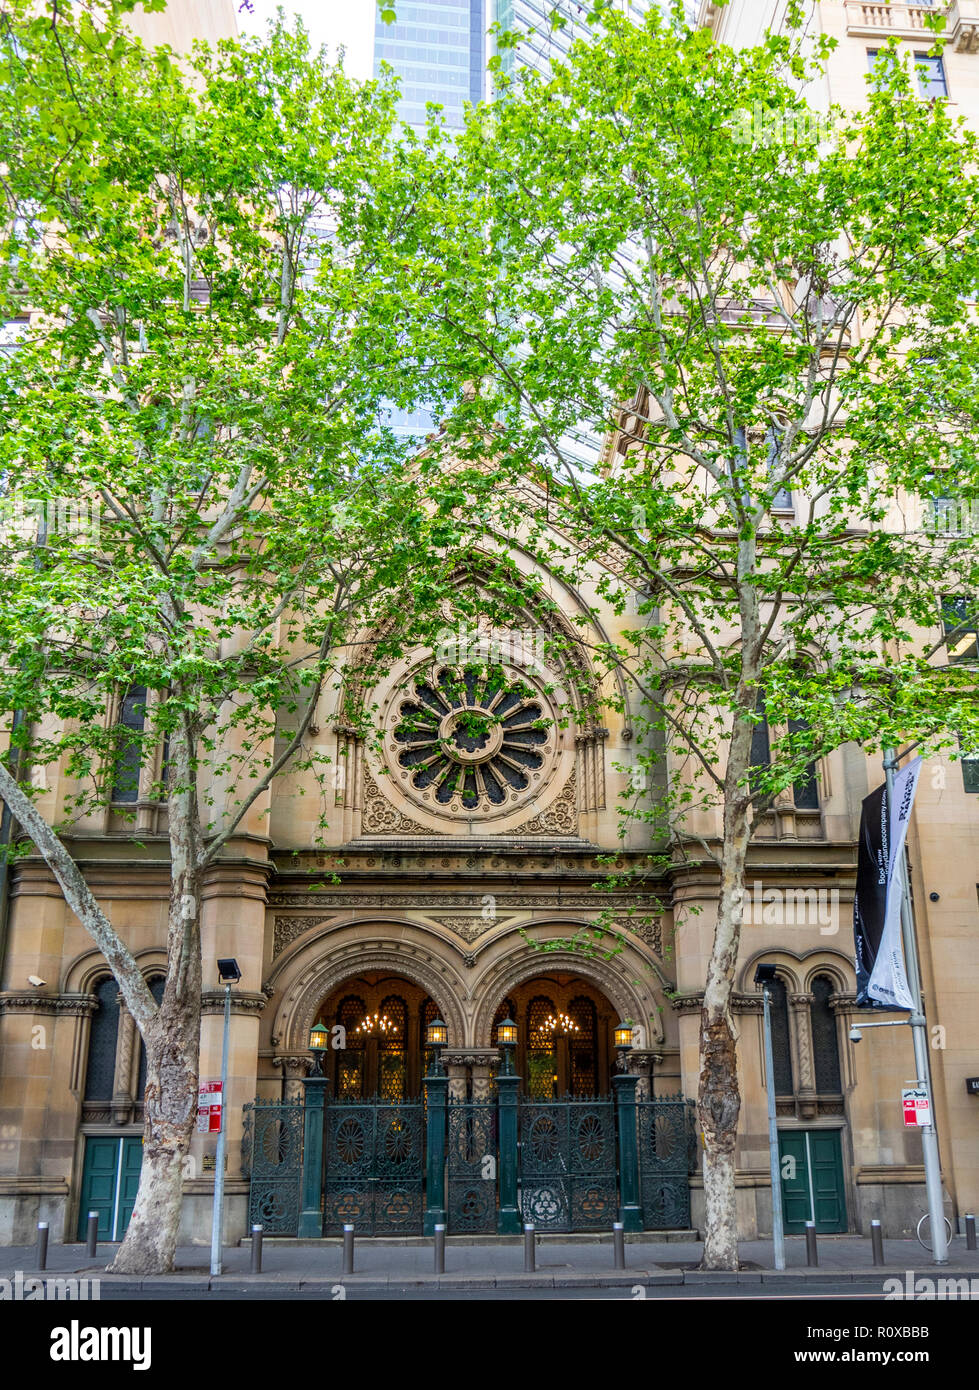 London Plane trees in front of the Great Synagogue of Sydney Elizabeth Street NSW Australia. Stock Photo